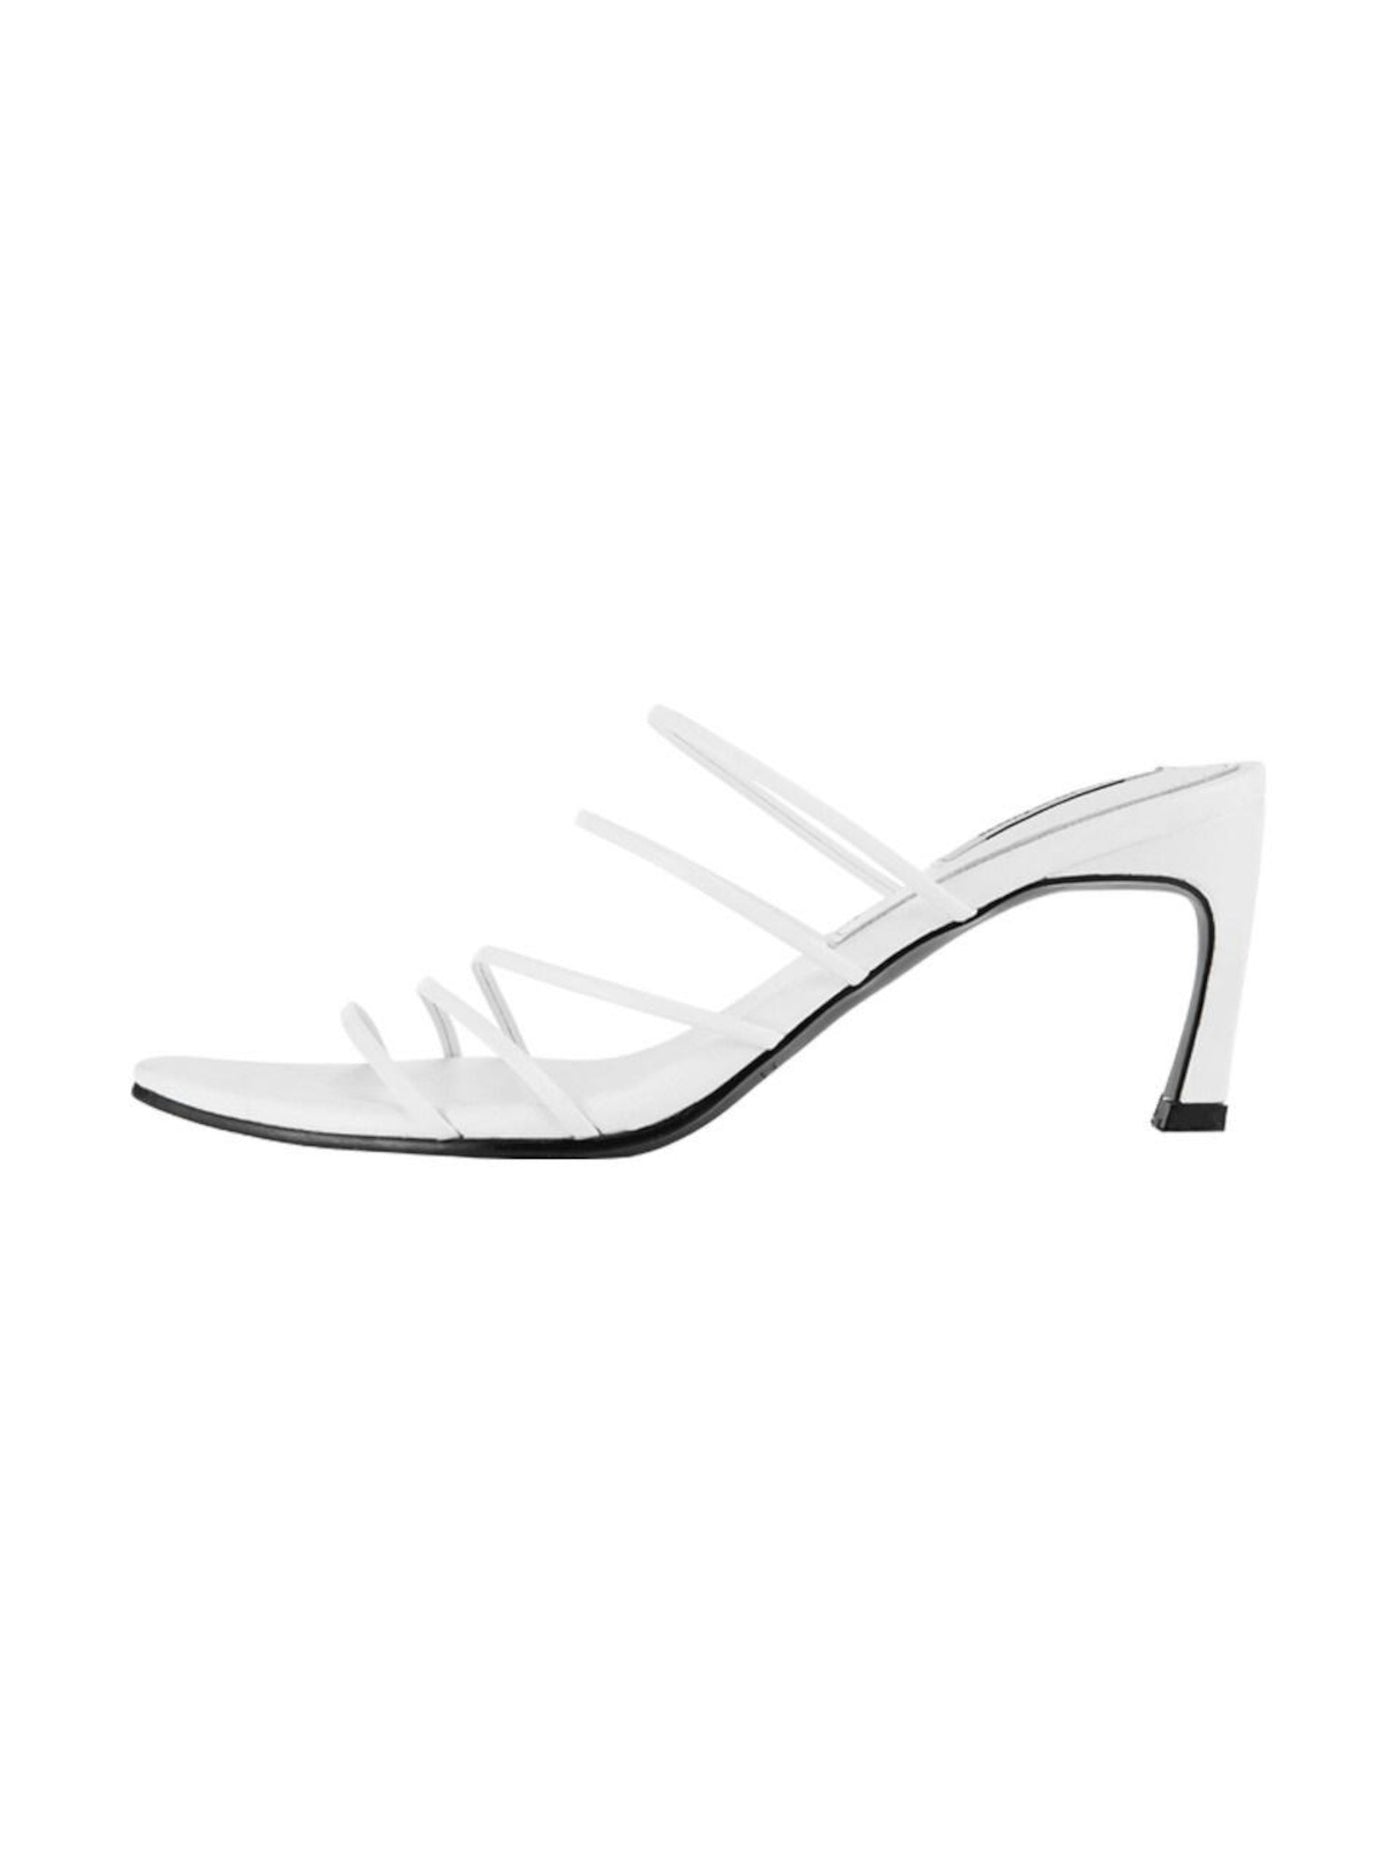 REIKE NEN Womens White Strappy Padded Pointed Toe Sculpted Heel Slip On Leather Dress Slide Sandals Shoes 37